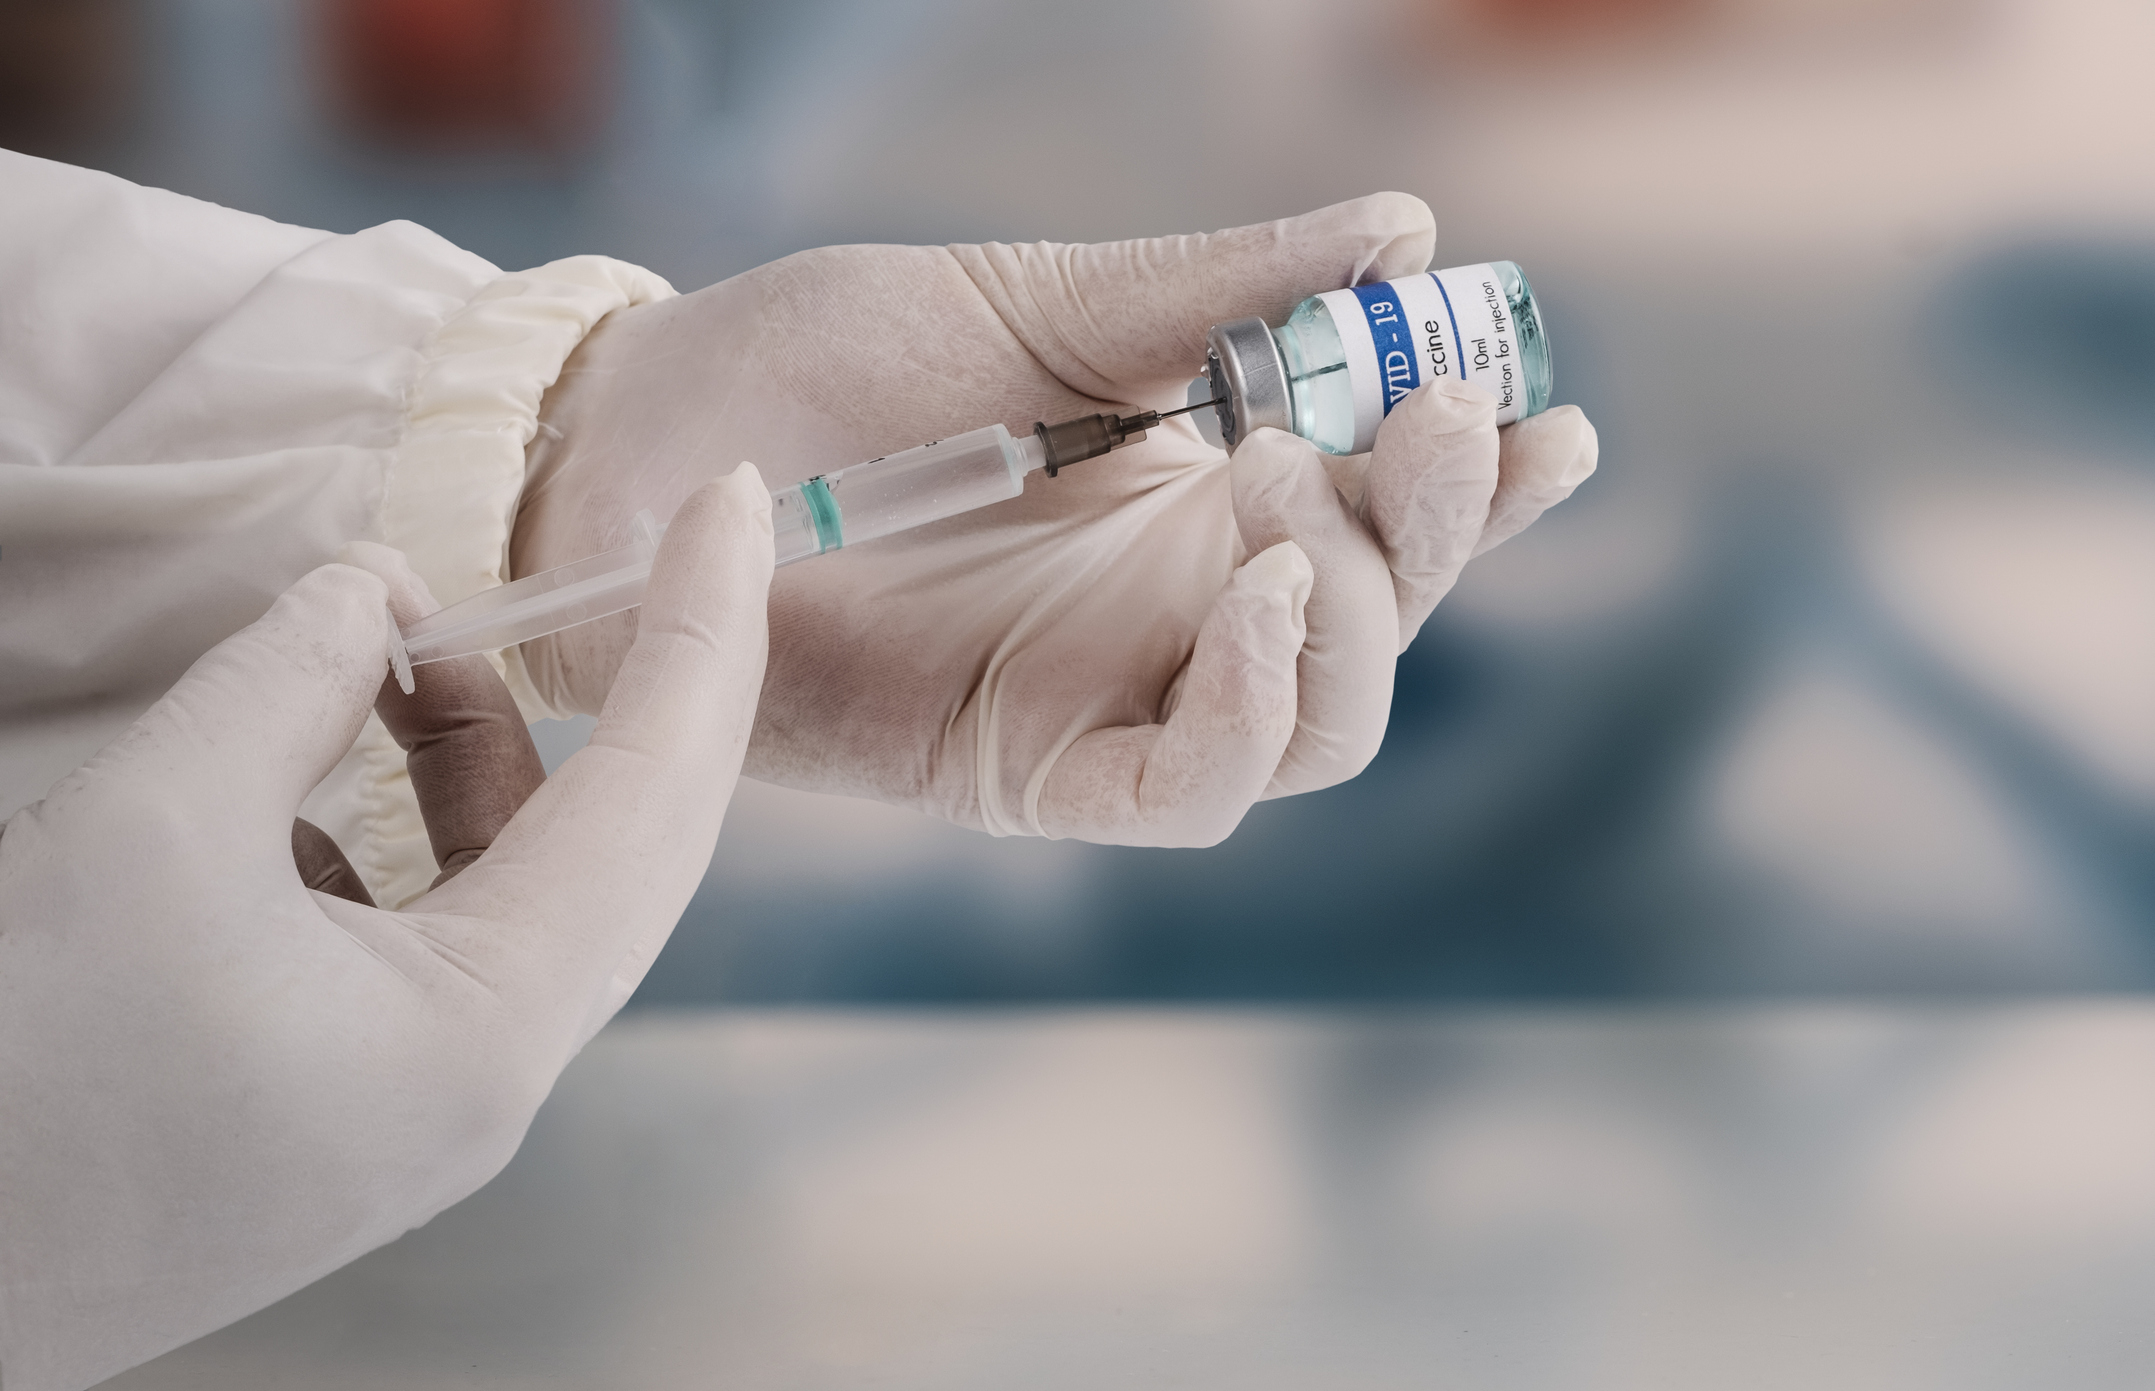 Person preparing a vaccine dose with a syringe, focused on their hands and the vial